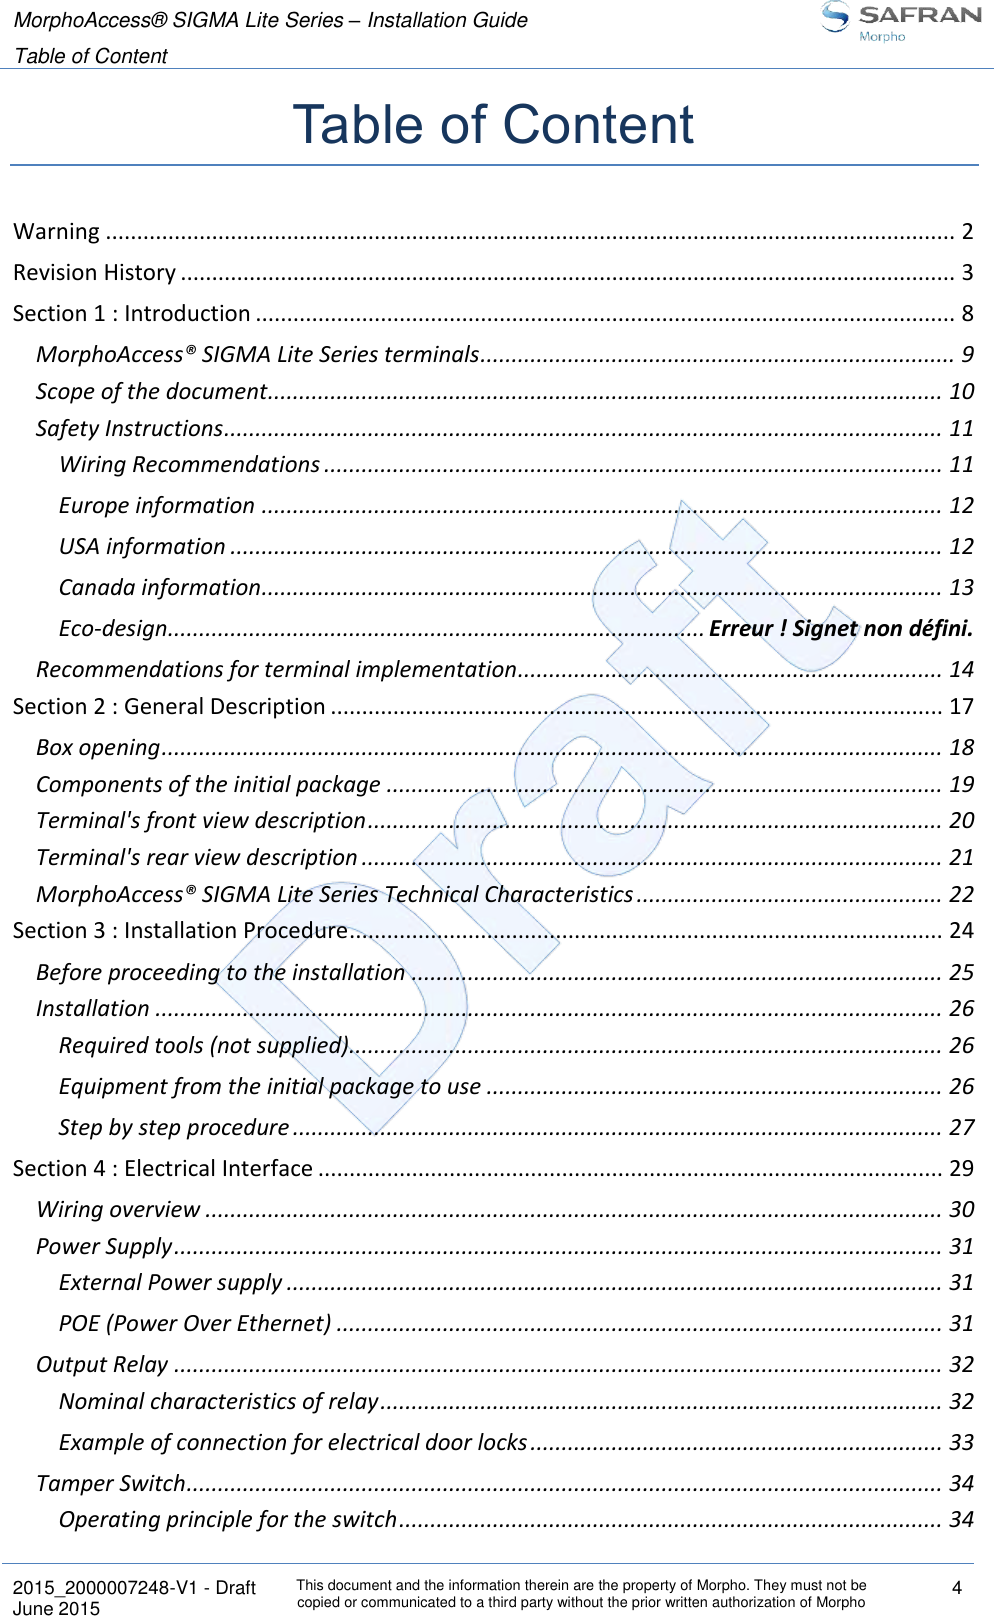 MorphoAccess® SIGMA Lite Series – Installation Guide  Table of Content   2015_2000007248-V1 - Draft This document and the information therein are the property of Morpho. They must not be copied or communicated to a third party without the prior written authorization of Morpho 4 June 2015   Table of Content Warning ........................................................................................................................................ 2 Revision History ............................................................................................................................ 3 Section 1 : Introduction ................................................................................................................ 8 MorphoAccess® SIGMA Lite Series terminals ............................................................................ 9 Scope of the document ............................................................................................................ 10 Safety Instructions ................................................................................................................... 11 Wiring Recommendations ................................................................................................... 11 Europe information ............................................................................................................. 12 USA information .................................................................................................................. 12 Canada information............................................................................................................. 13 Eco-design ...................................................................................... Erreur ! Signet non défini. Recommendations for terminal implementation .................................................................... 14 Section 2 : General Description .................................................................................................. 17 Box opening ............................................................................................................................. 18 Components of the initial package ......................................................................................... 19 Terminal&apos;s front view description ............................................................................................ 20 Terminal&apos;s rear view description ............................................................................................. 21 MorphoAccess® SIGMA Lite Series Technical Characteristics ................................................. 22 Section 3 : Installation Procedure ............................................................................................... 24 Before proceeding to the installation ..................................................................................... 25 Installation .............................................................................................................................. 26 Required tools (not supplied)............................................................................................... 26 Equipment from the initial package to use ......................................................................... 26 Step by step procedure ........................................................................................................ 27 Section 4 : Electrical Interface .................................................................................................... 29 Wiring overview ...................................................................................................................... 30 Power Supply ........................................................................................................................... 31 External Power supply ......................................................................................................... 31 POE (Power Over Ethernet) ................................................................................................. 31 Output Relay ........................................................................................................................... 32 Nominal characteristics of relay .......................................................................................... 32 Example of connection for electrical door locks .................................................................. 33 Tamper Switch ......................................................................................................................... 34 Operating principle for the switch ....................................................................................... 34 